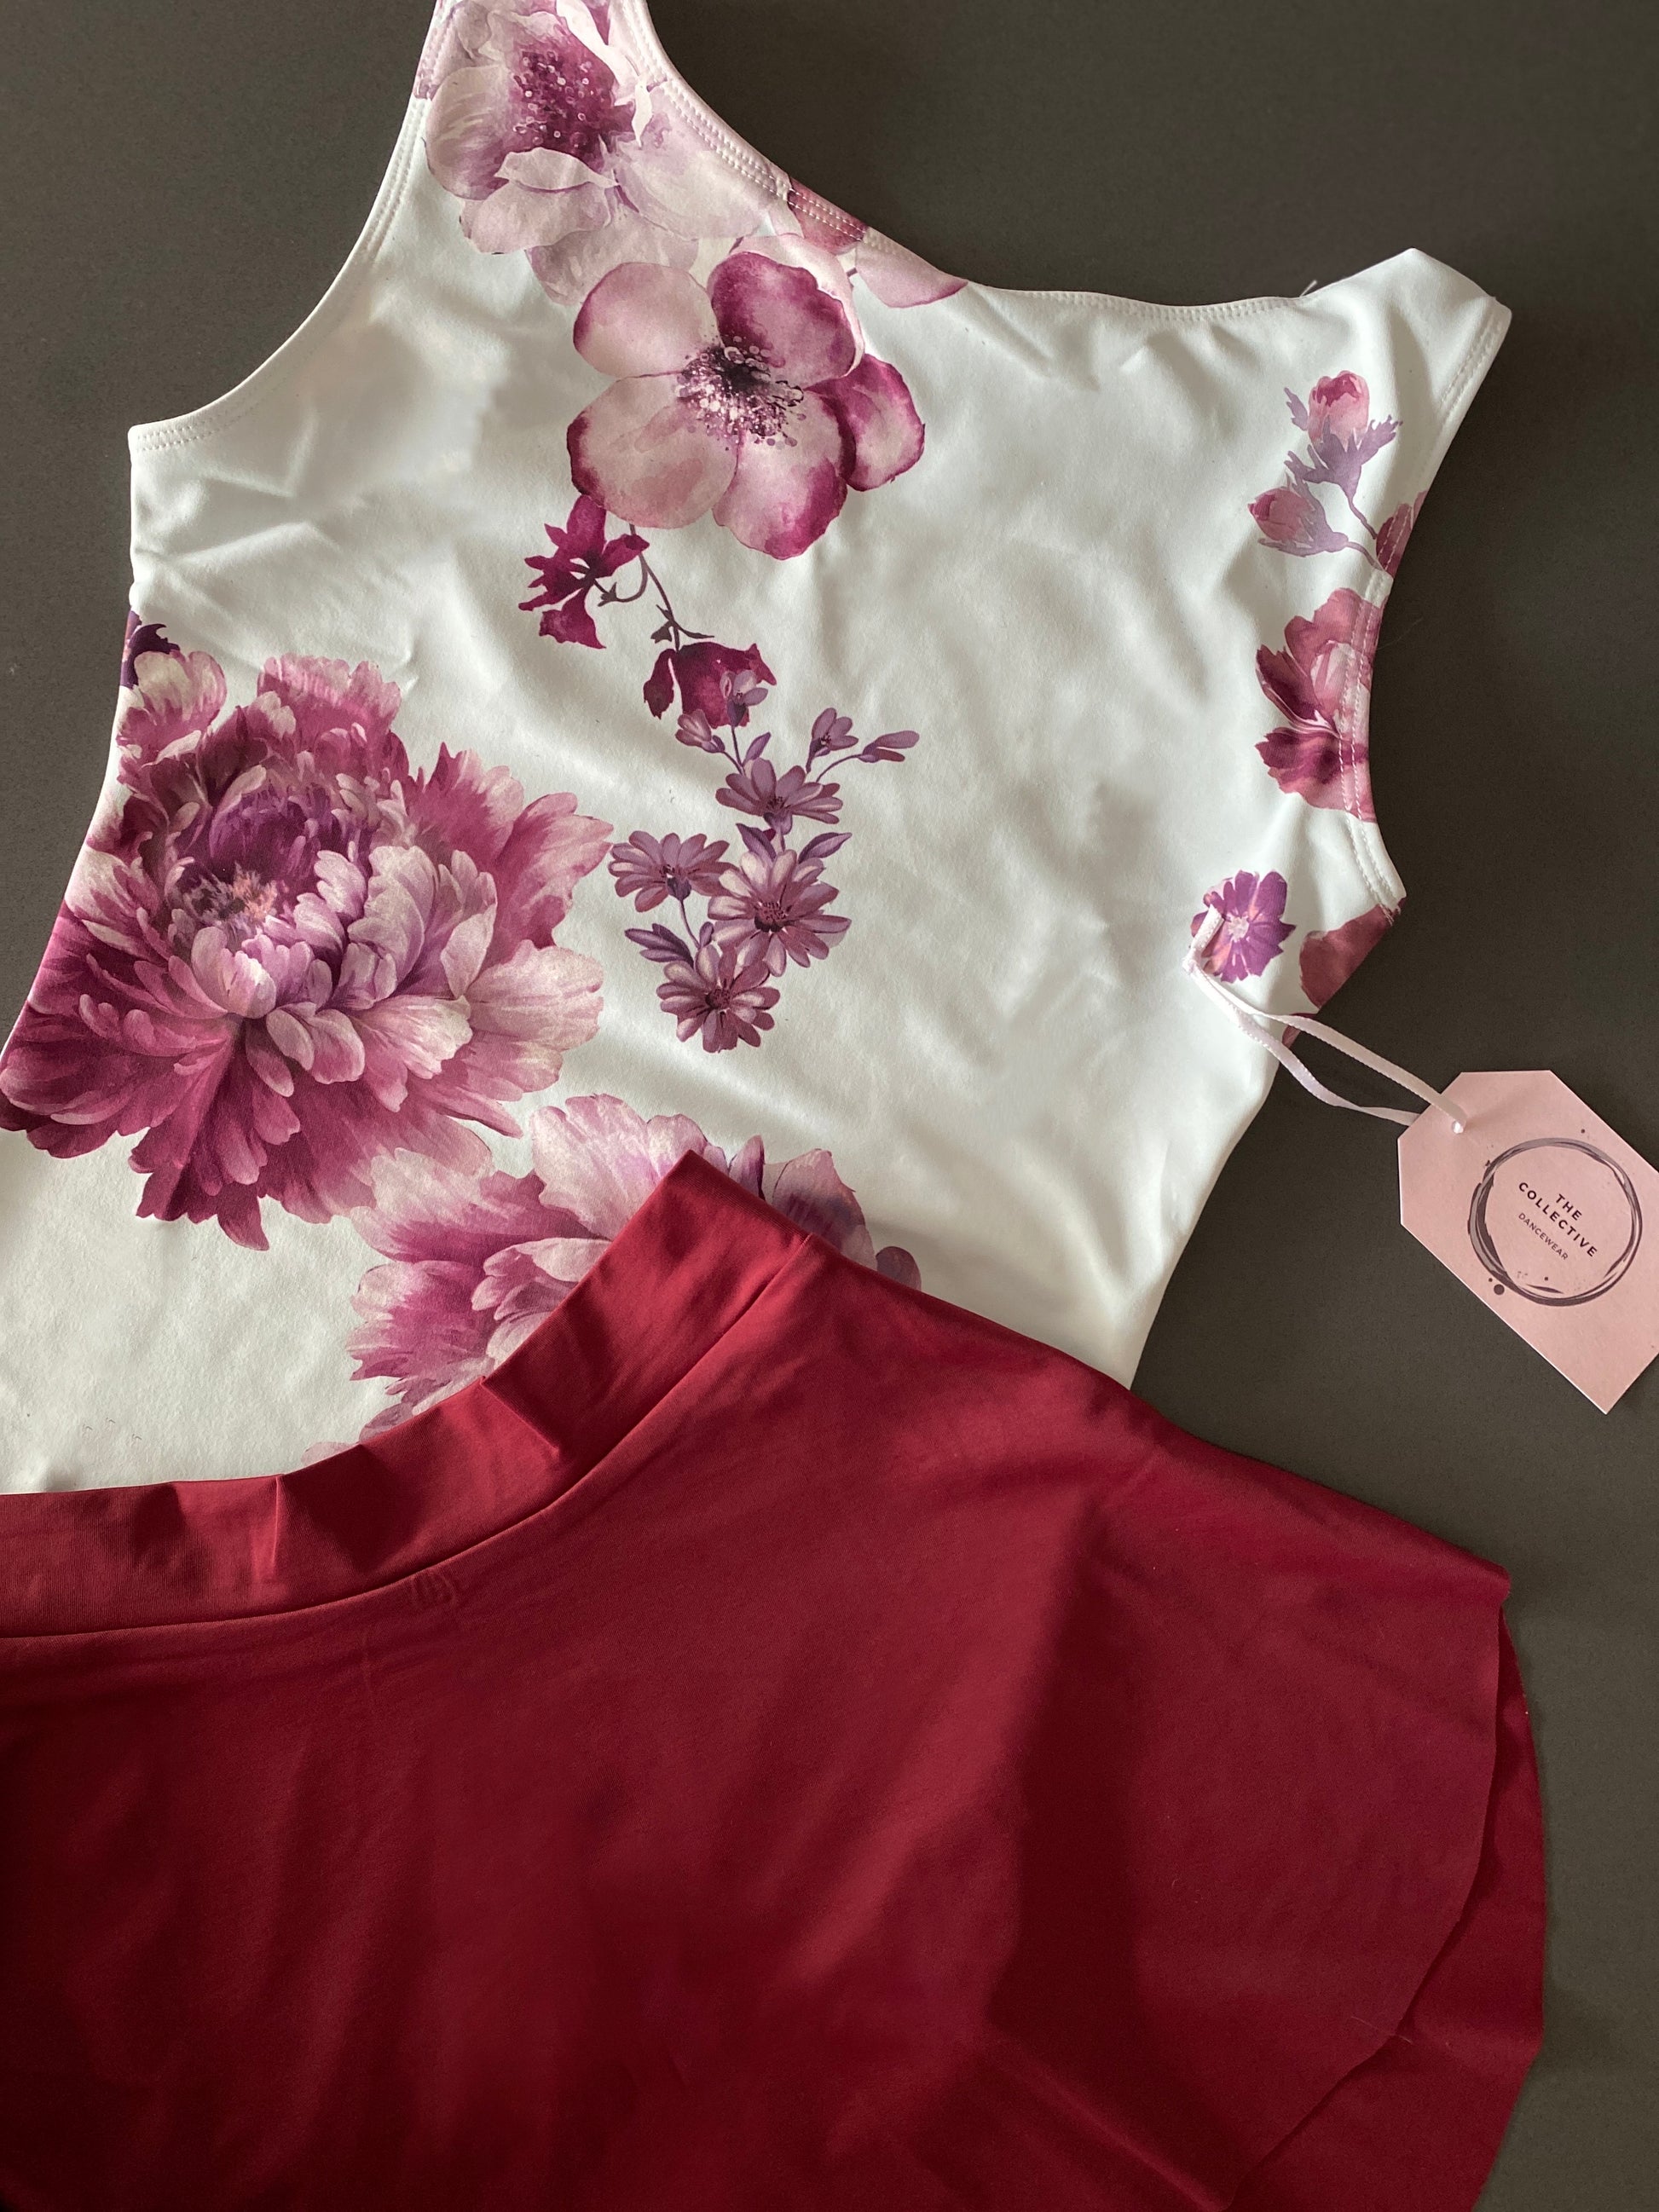 Leotard in pale blue with burgundy flower pattern from The Collective Dancewear with matching ballet skirt in burgundy